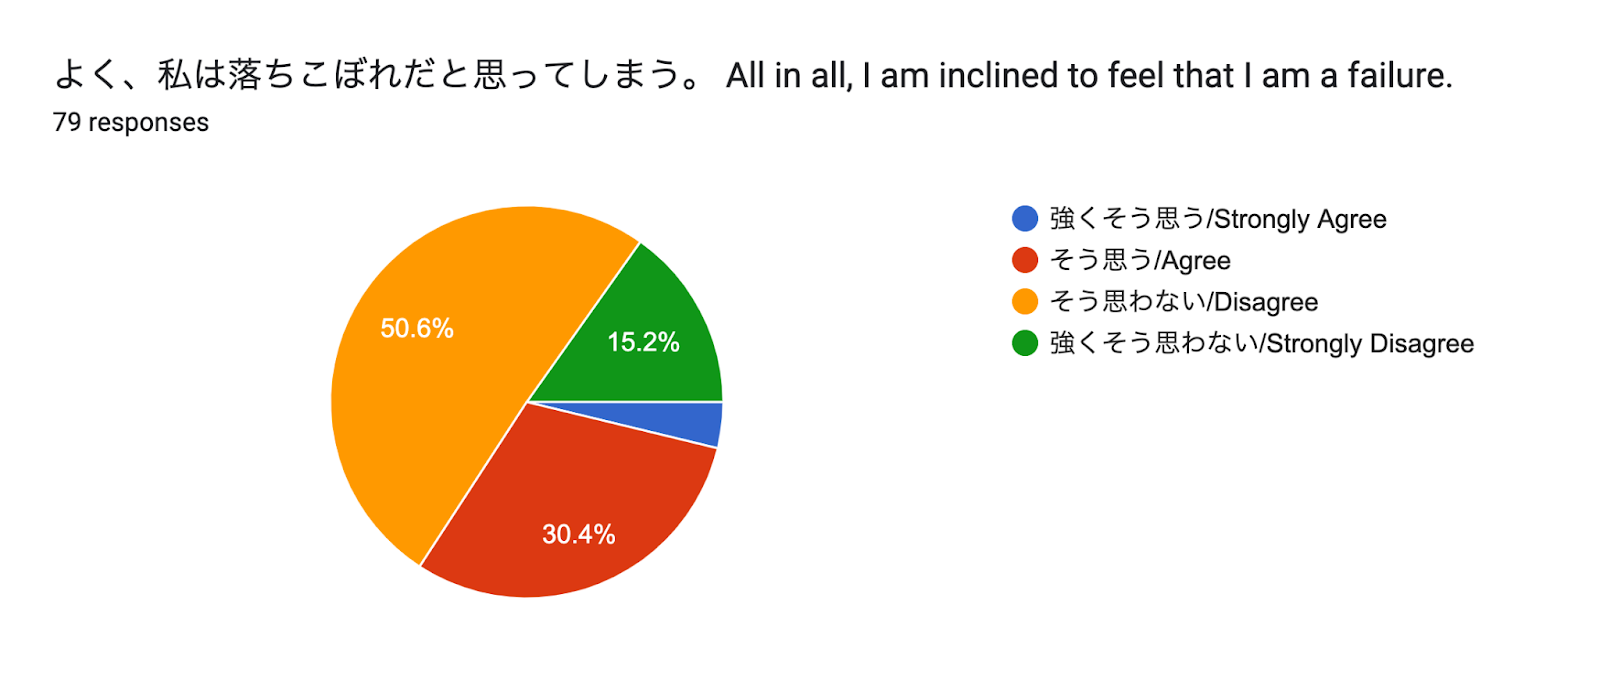 Forms response chart. Question title: よく、私は落ちこぼれだと思ってしまう。
All in all, I am inclined to feel that I am a failure.. Number of responses: 79 responses.